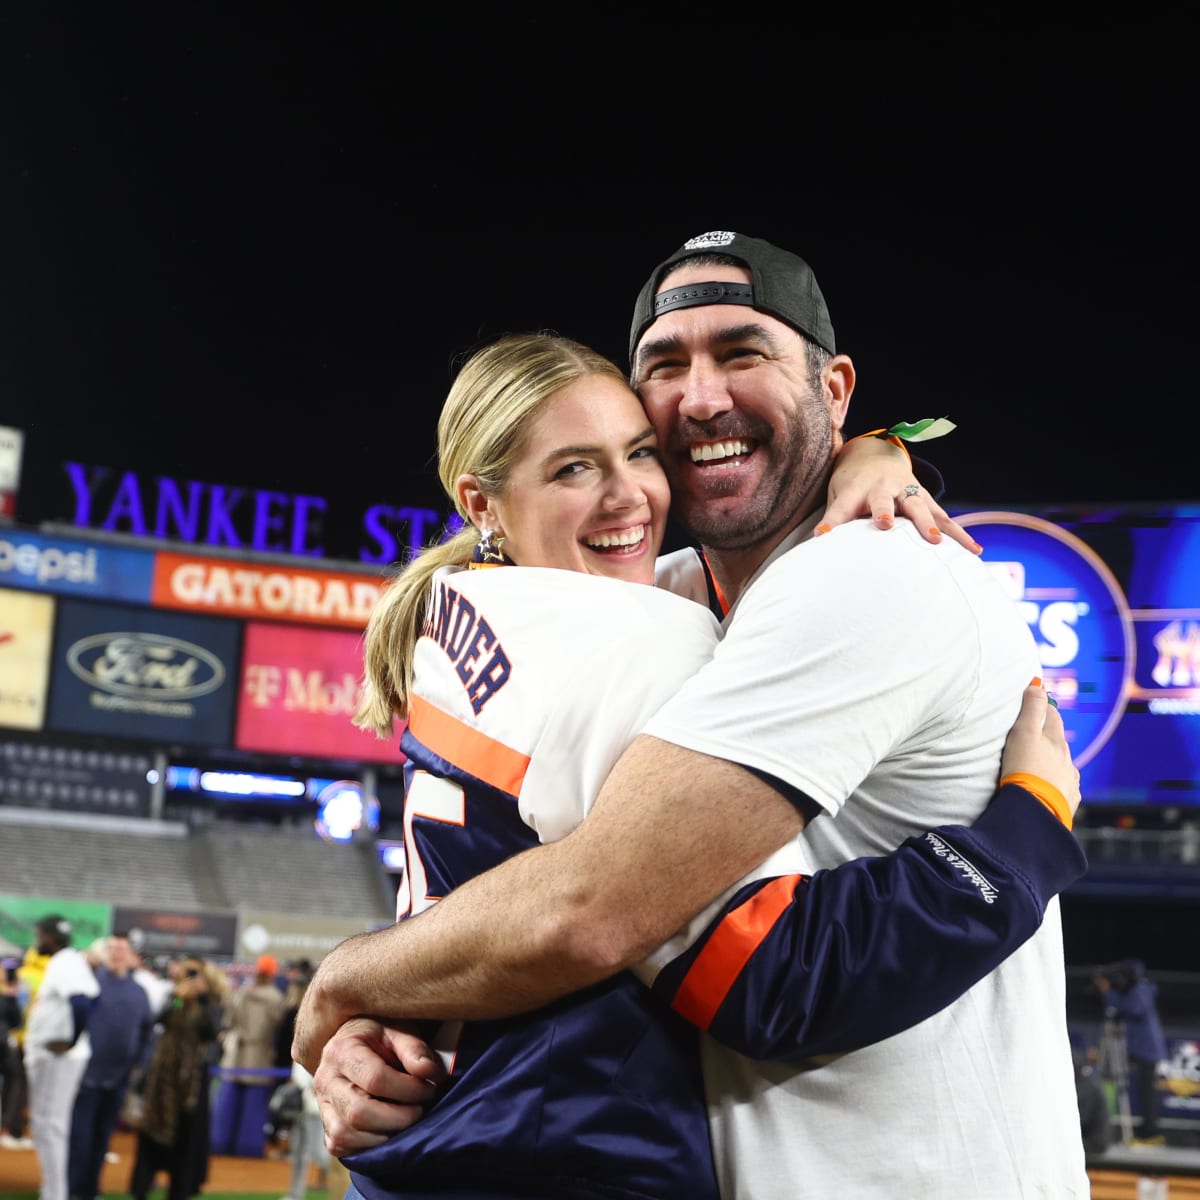 Kate Upton's Astros jacket has sold out, but here are some amazing